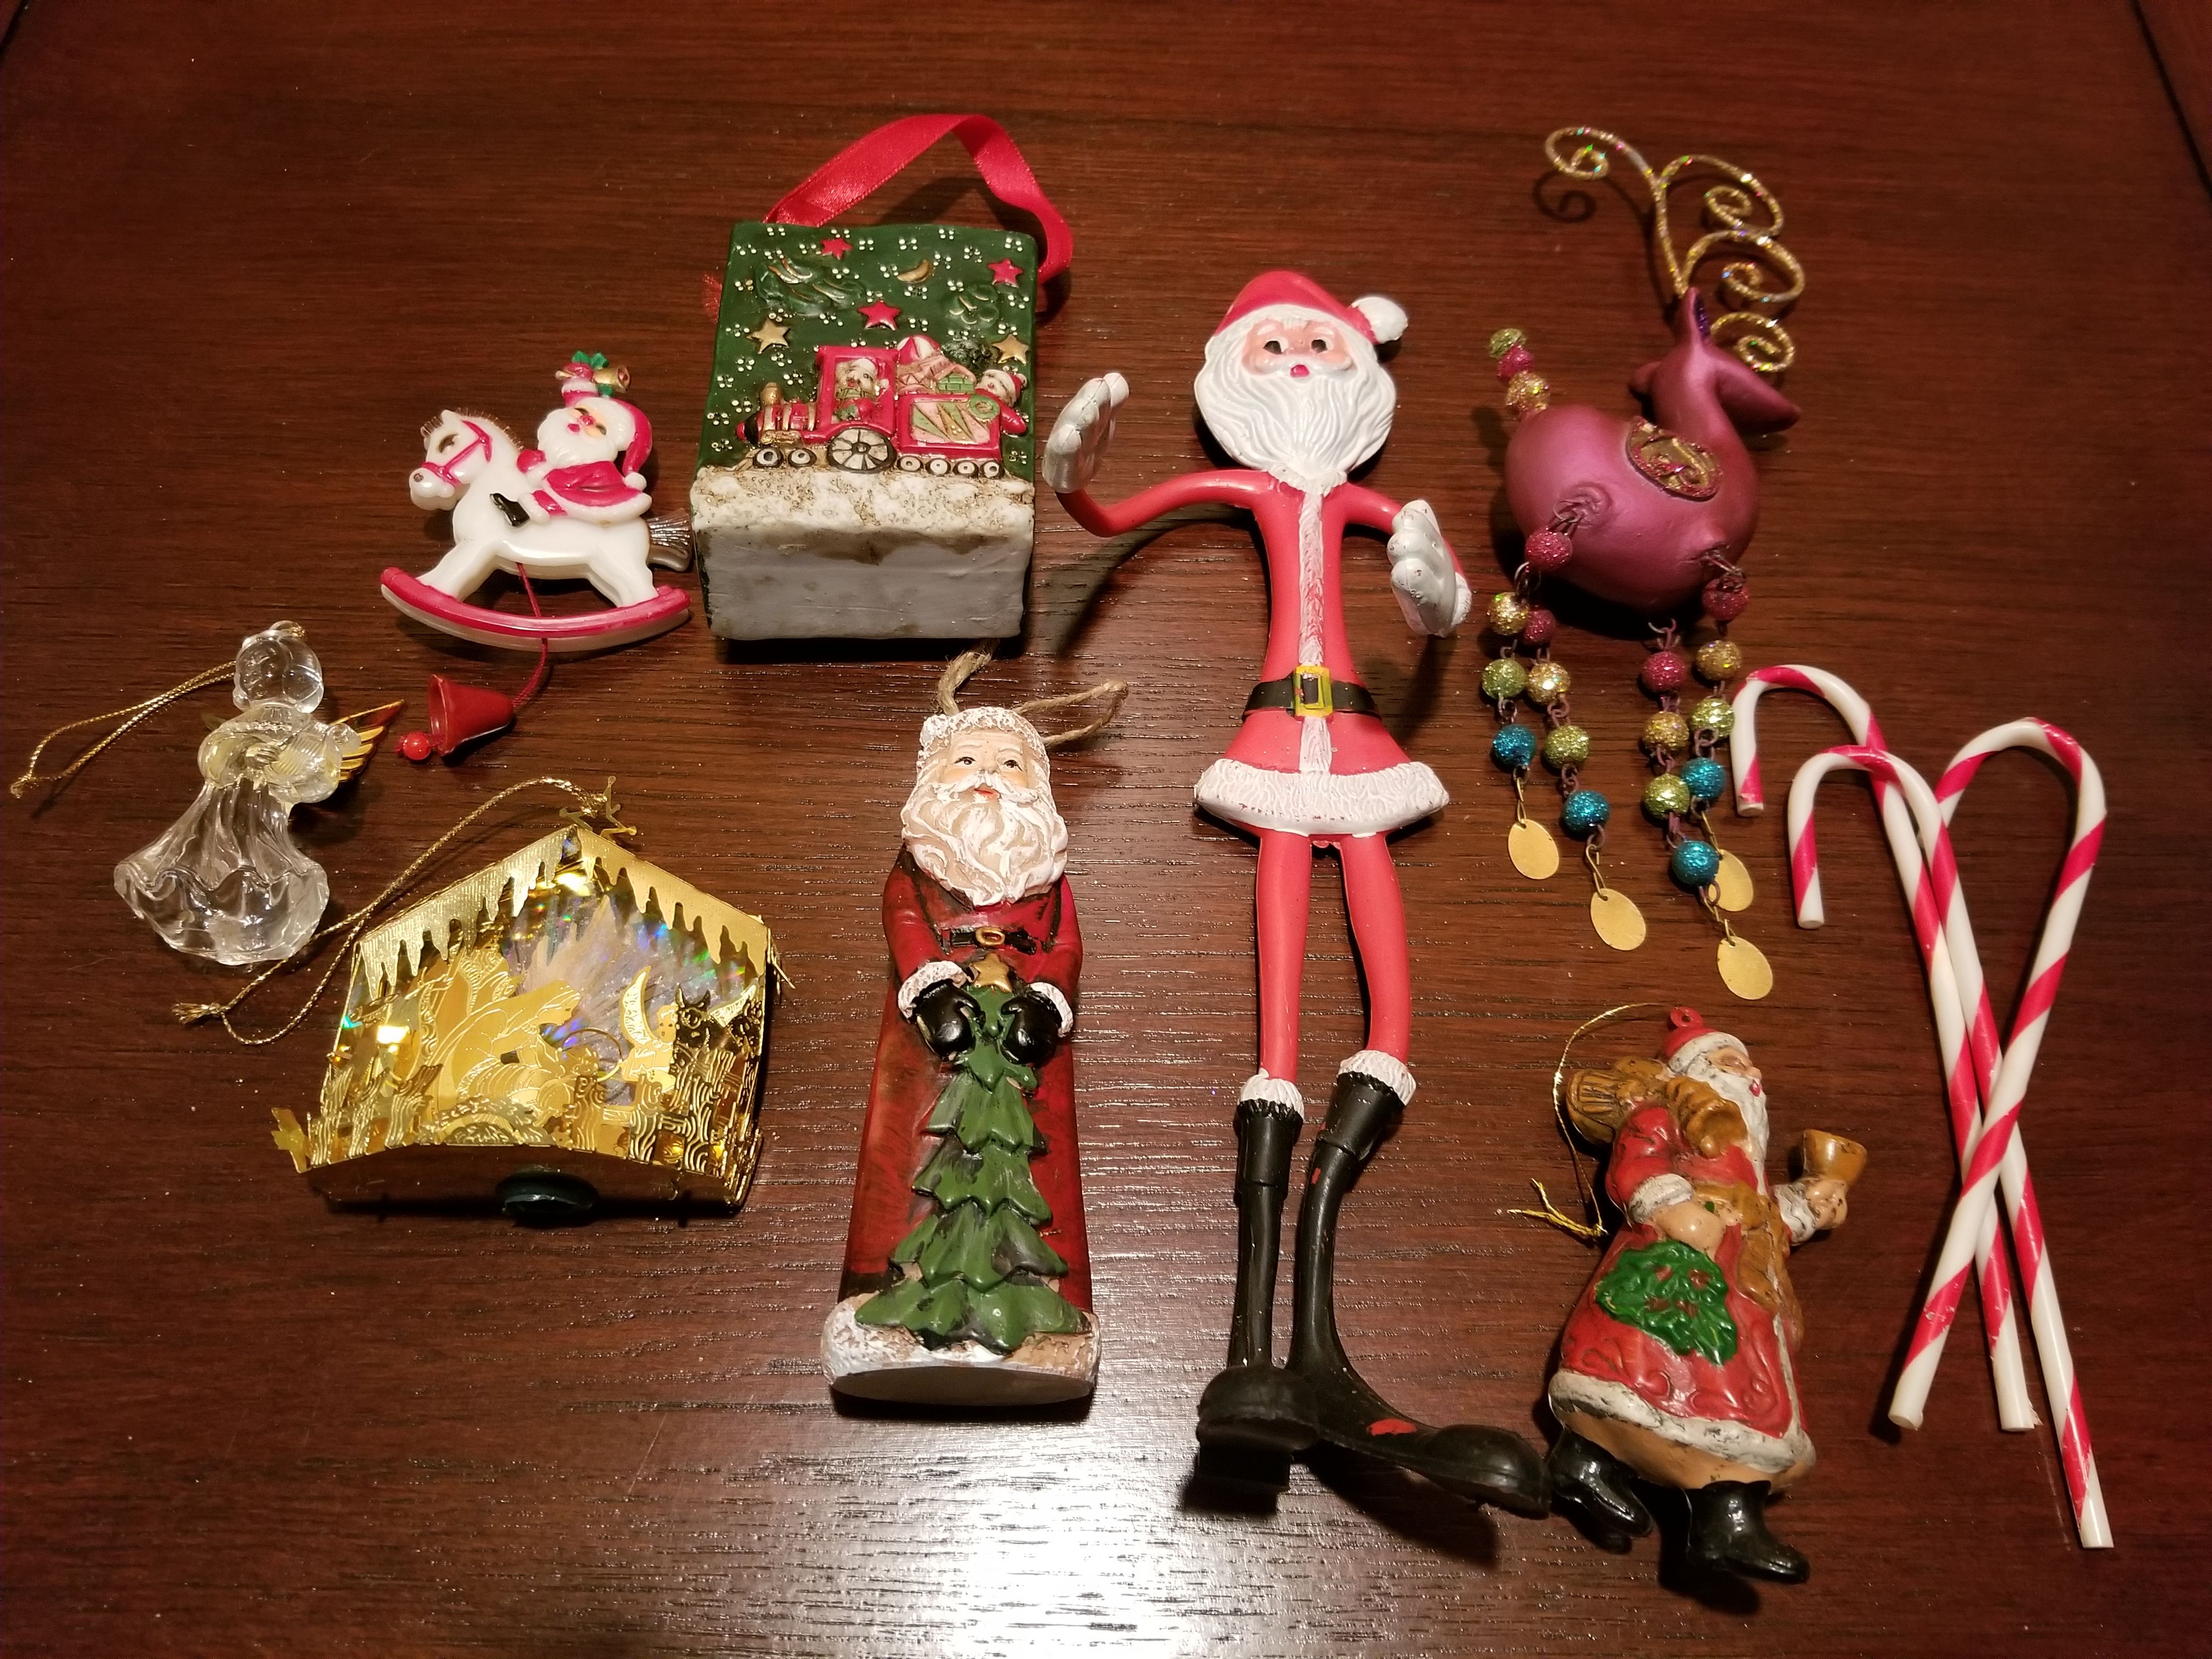 Assorted ornaments